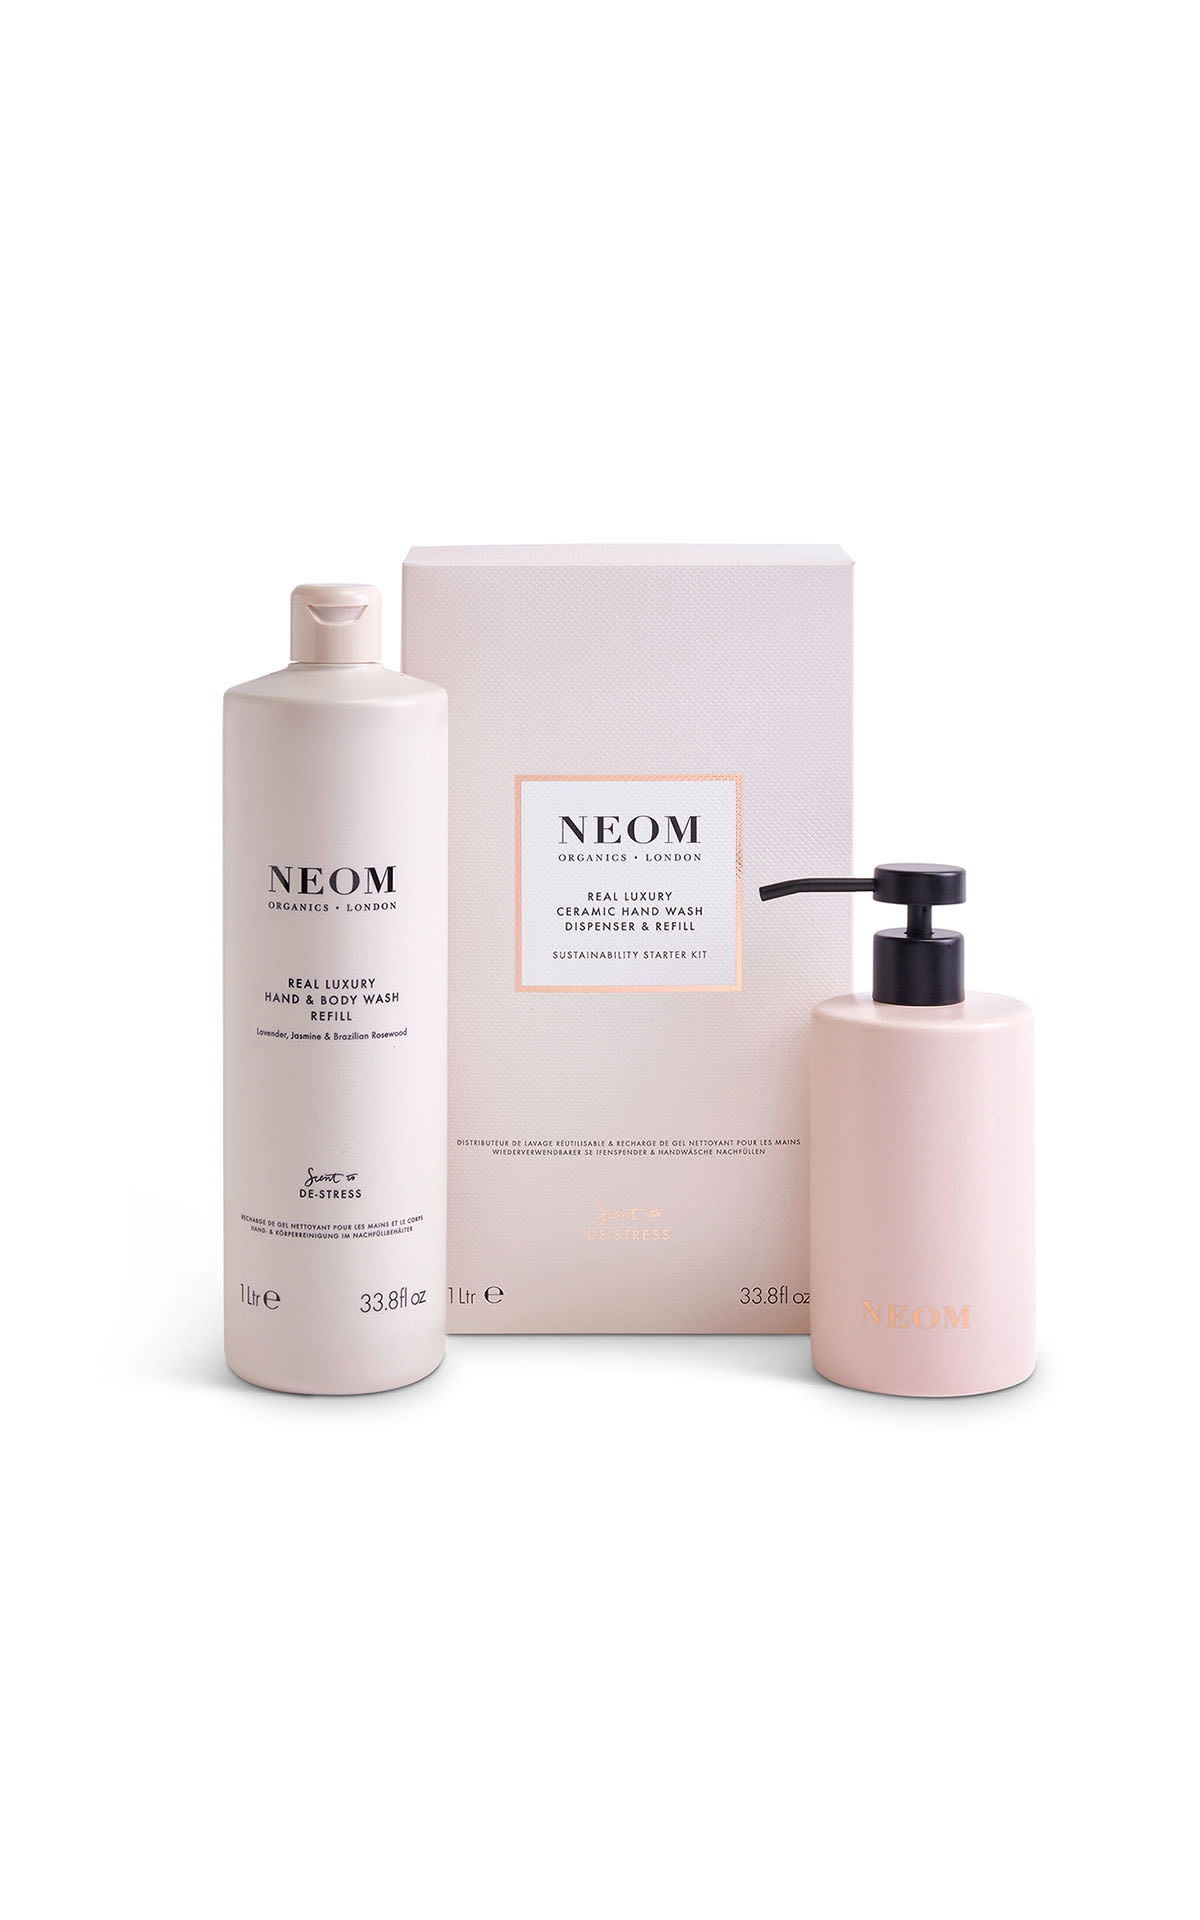 NEOM Real luxury ceramic wash and refill from Bicester Village